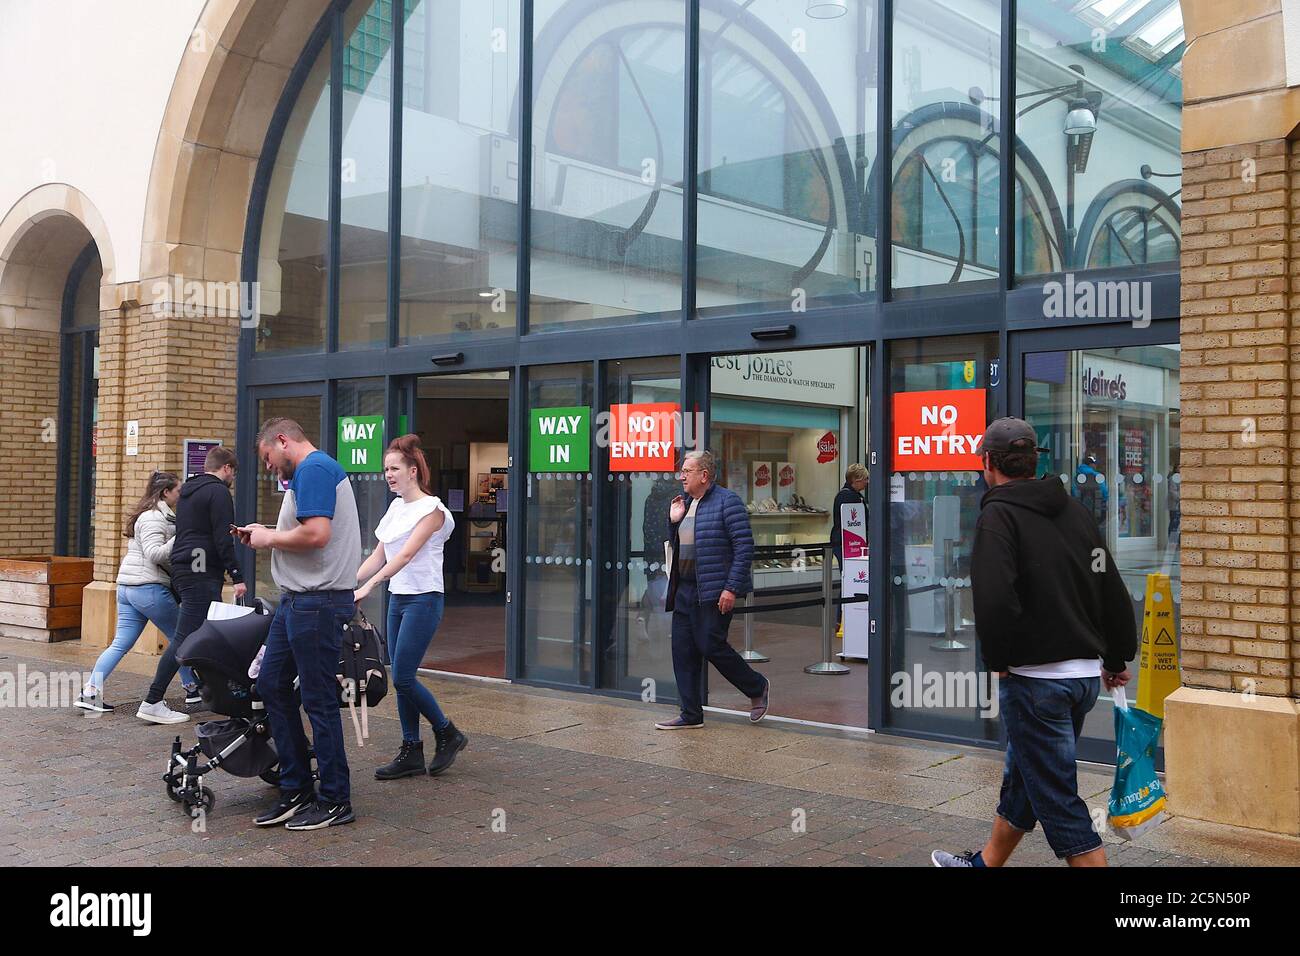 Hastings, East Sussex, UK. 04 Jul, 2020. Coronavirus update: With the government relaxing the rules further, bars, pubs, restaurants and barbershops are allowed to open. Clear signage indicating in and out at this shopping mall in Hastings. Photo Credit: Paul Lawrenson-PAL Media/Alamy Live News Stock Photo